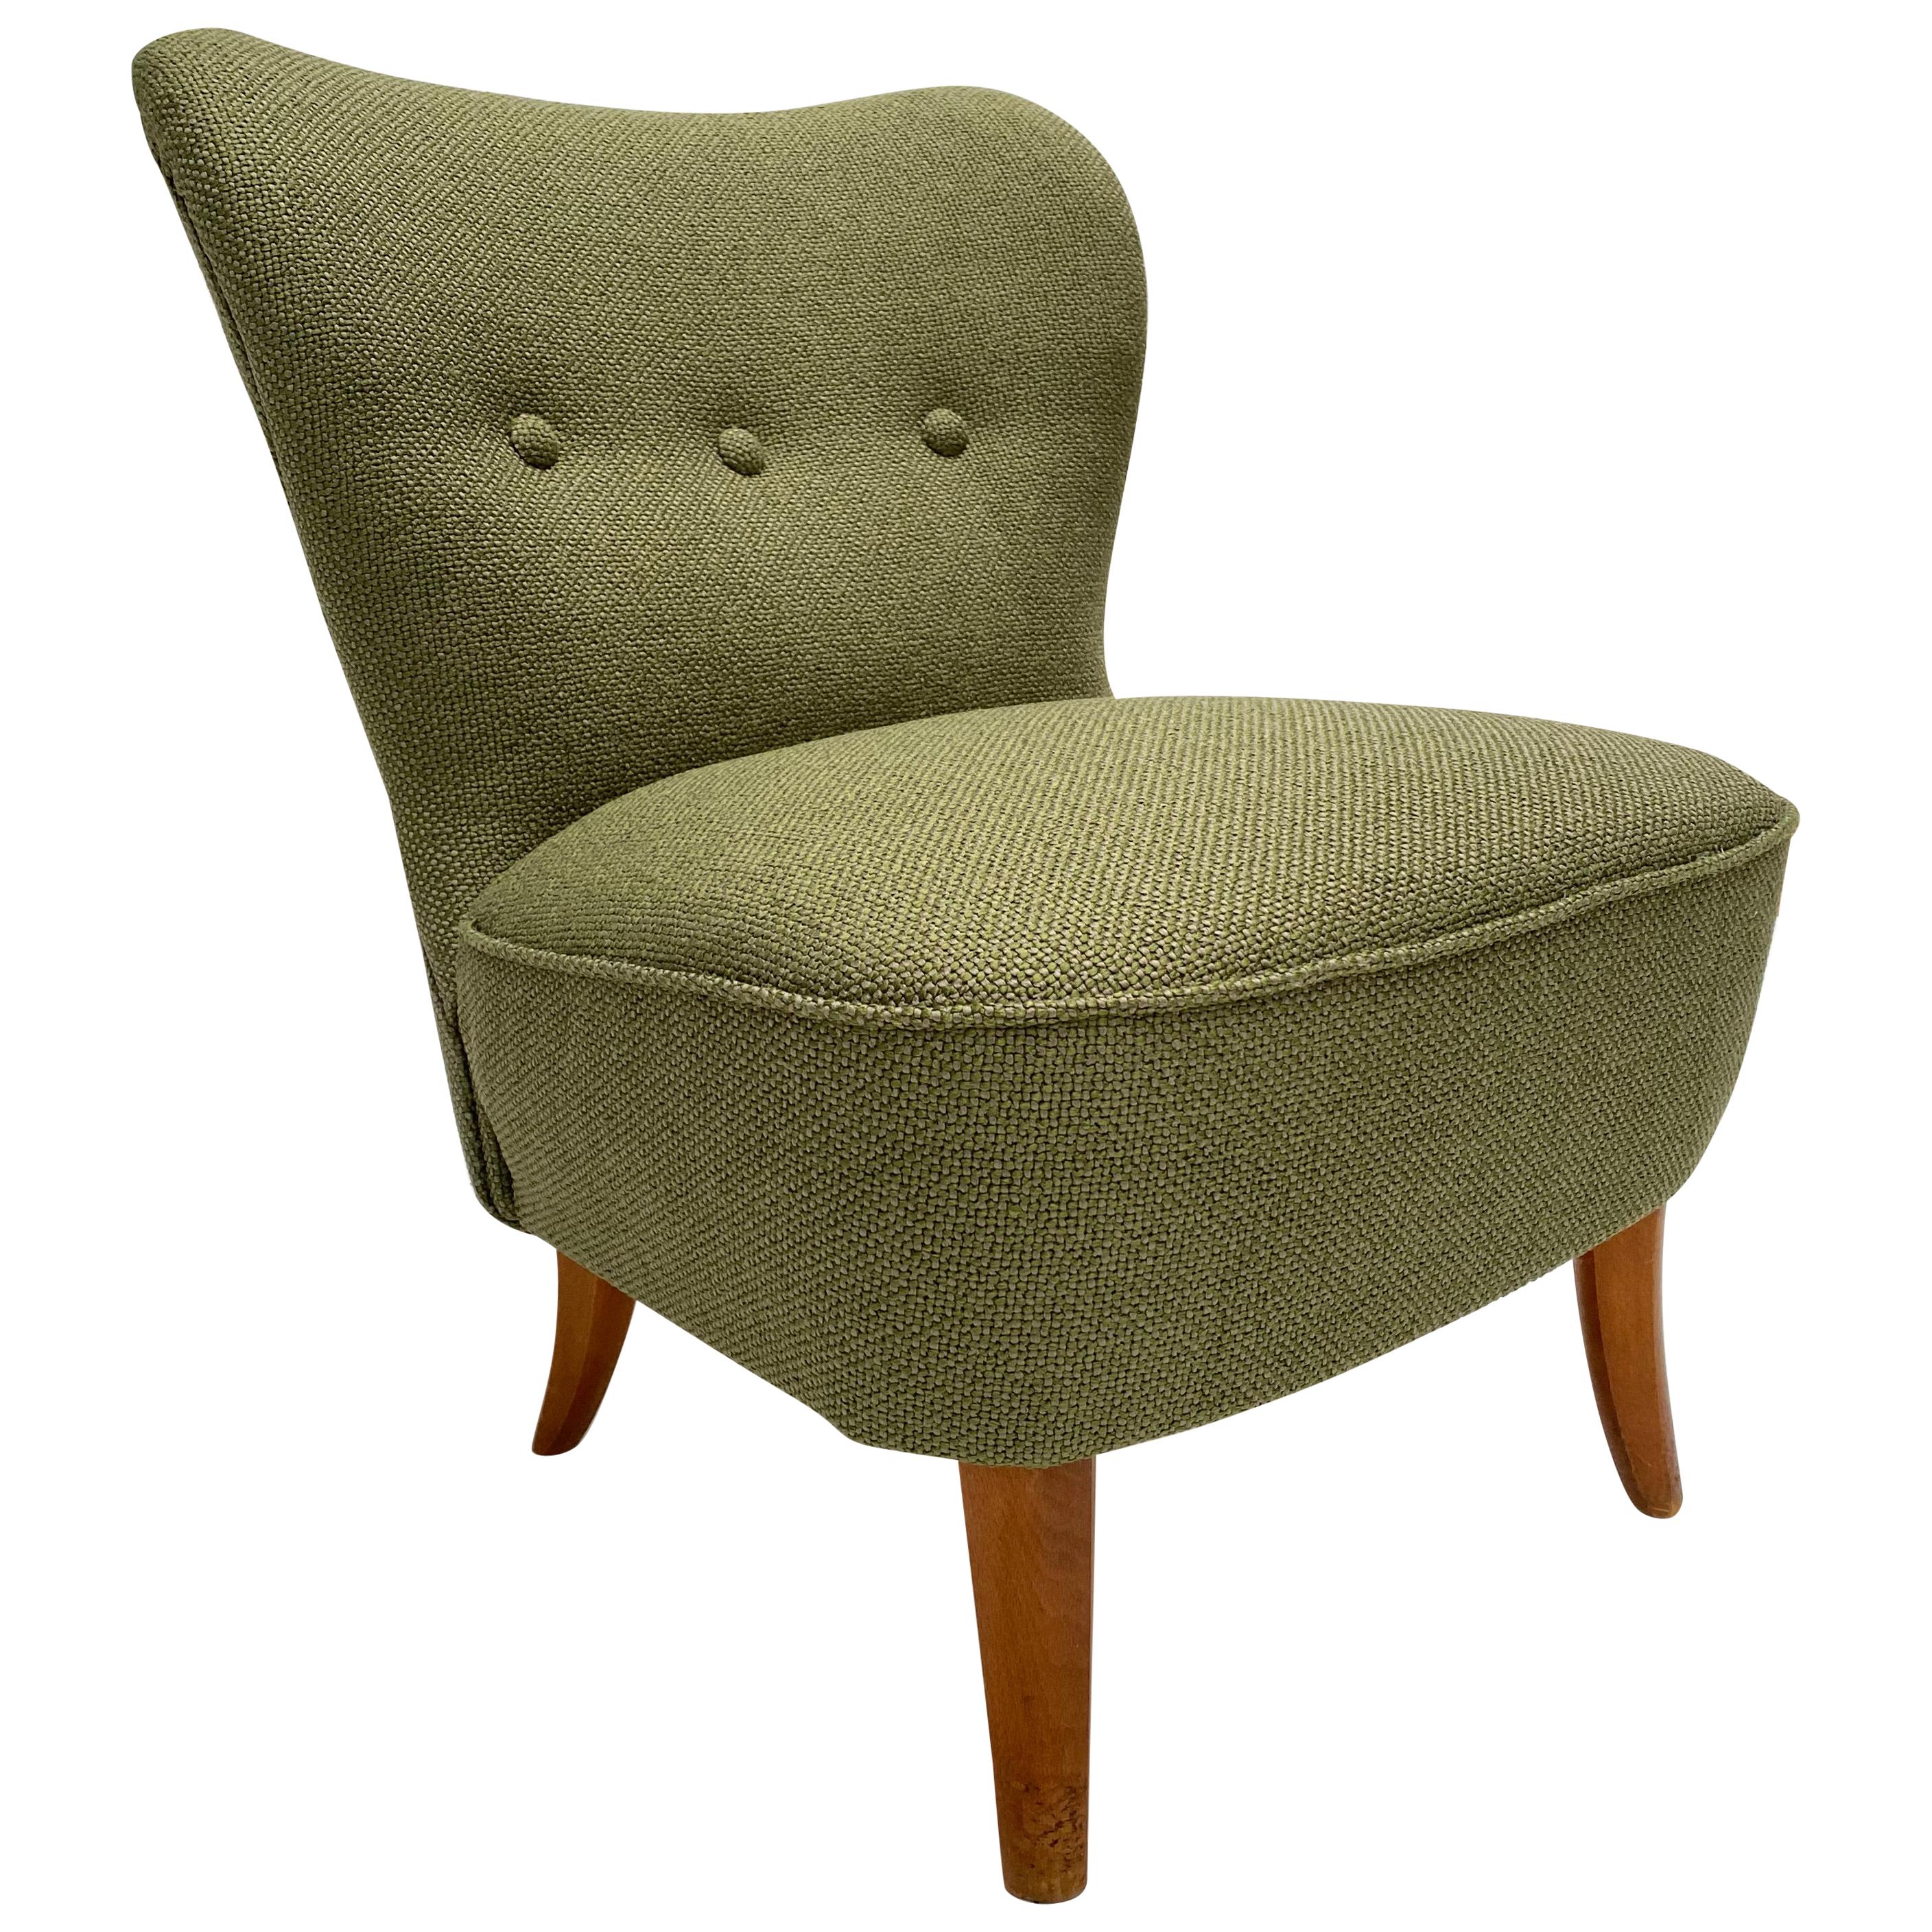 New Upholstered Ploeg Wool Lounge Chair by Tijsseling, the Netherlands, 1950s